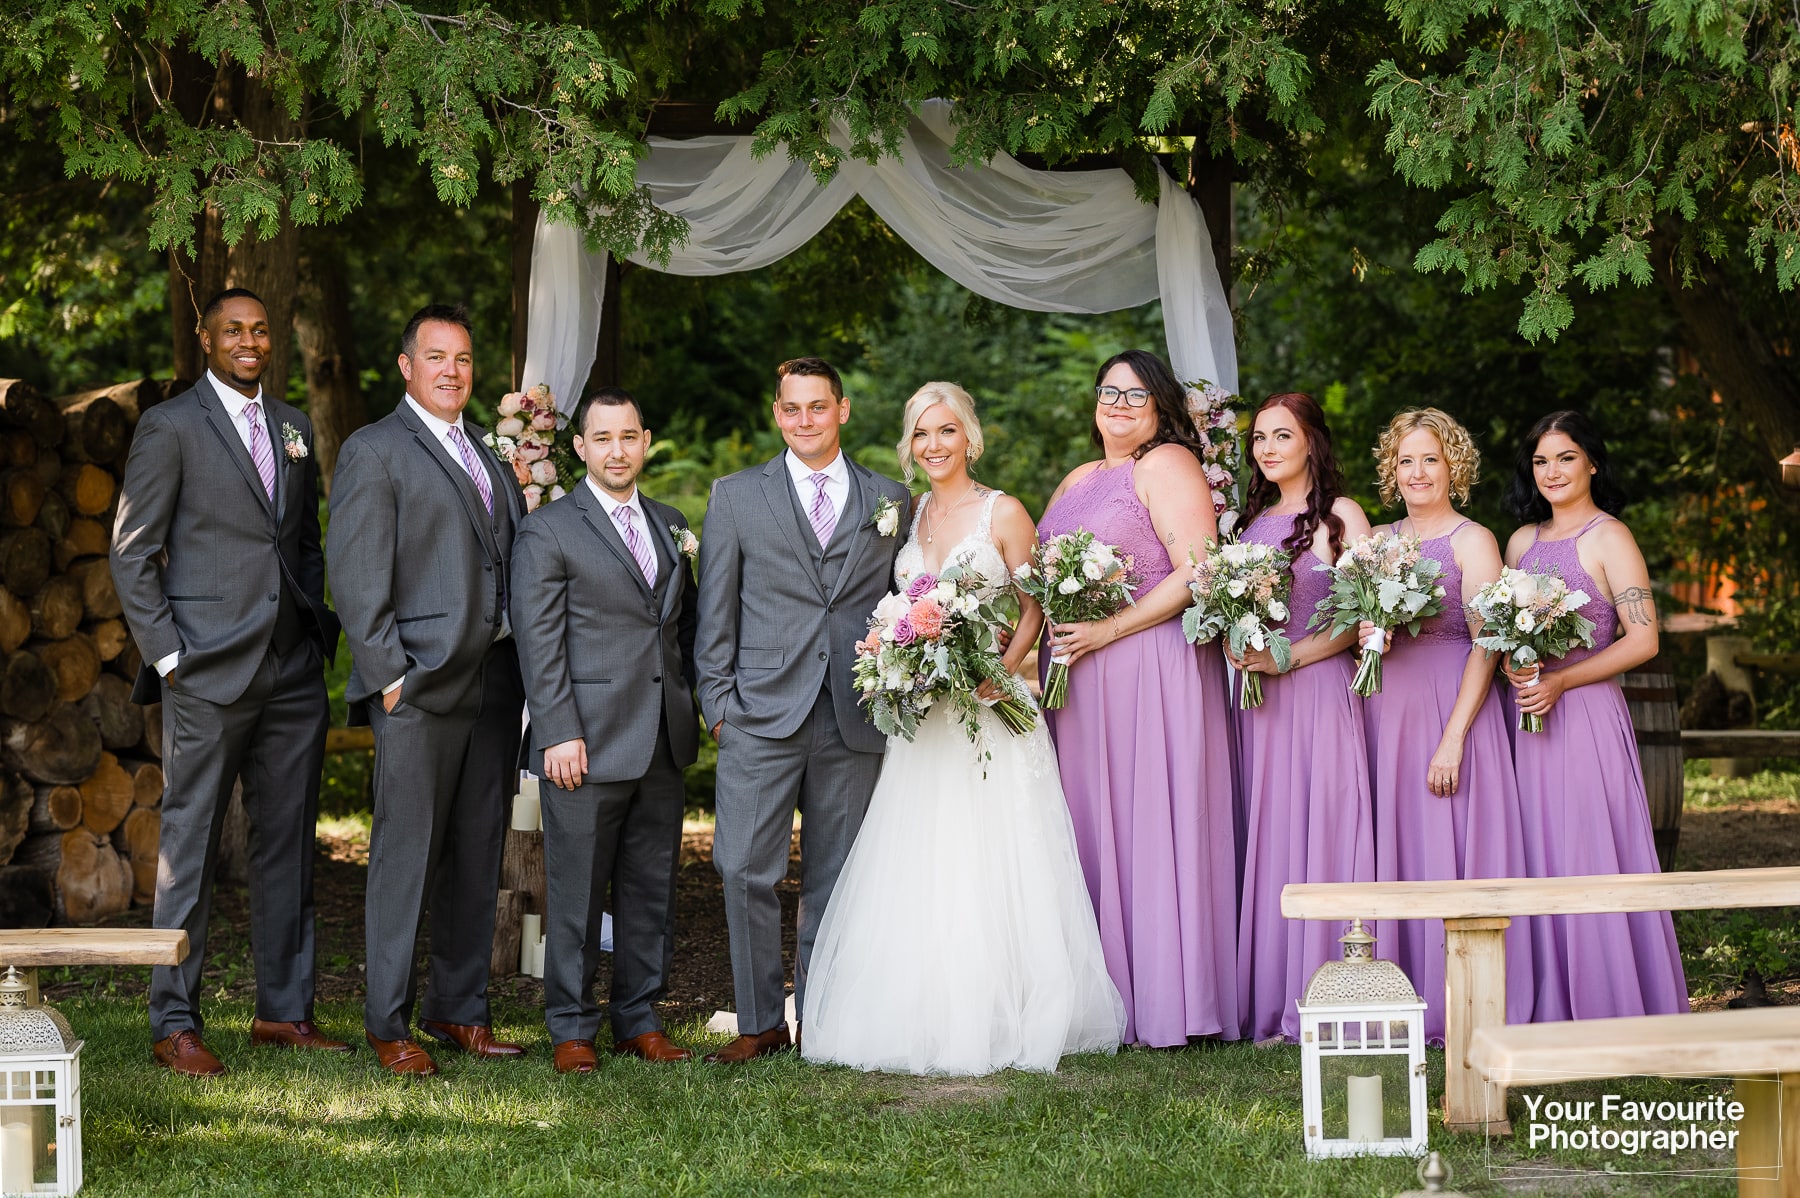 Posed photo of wedding party